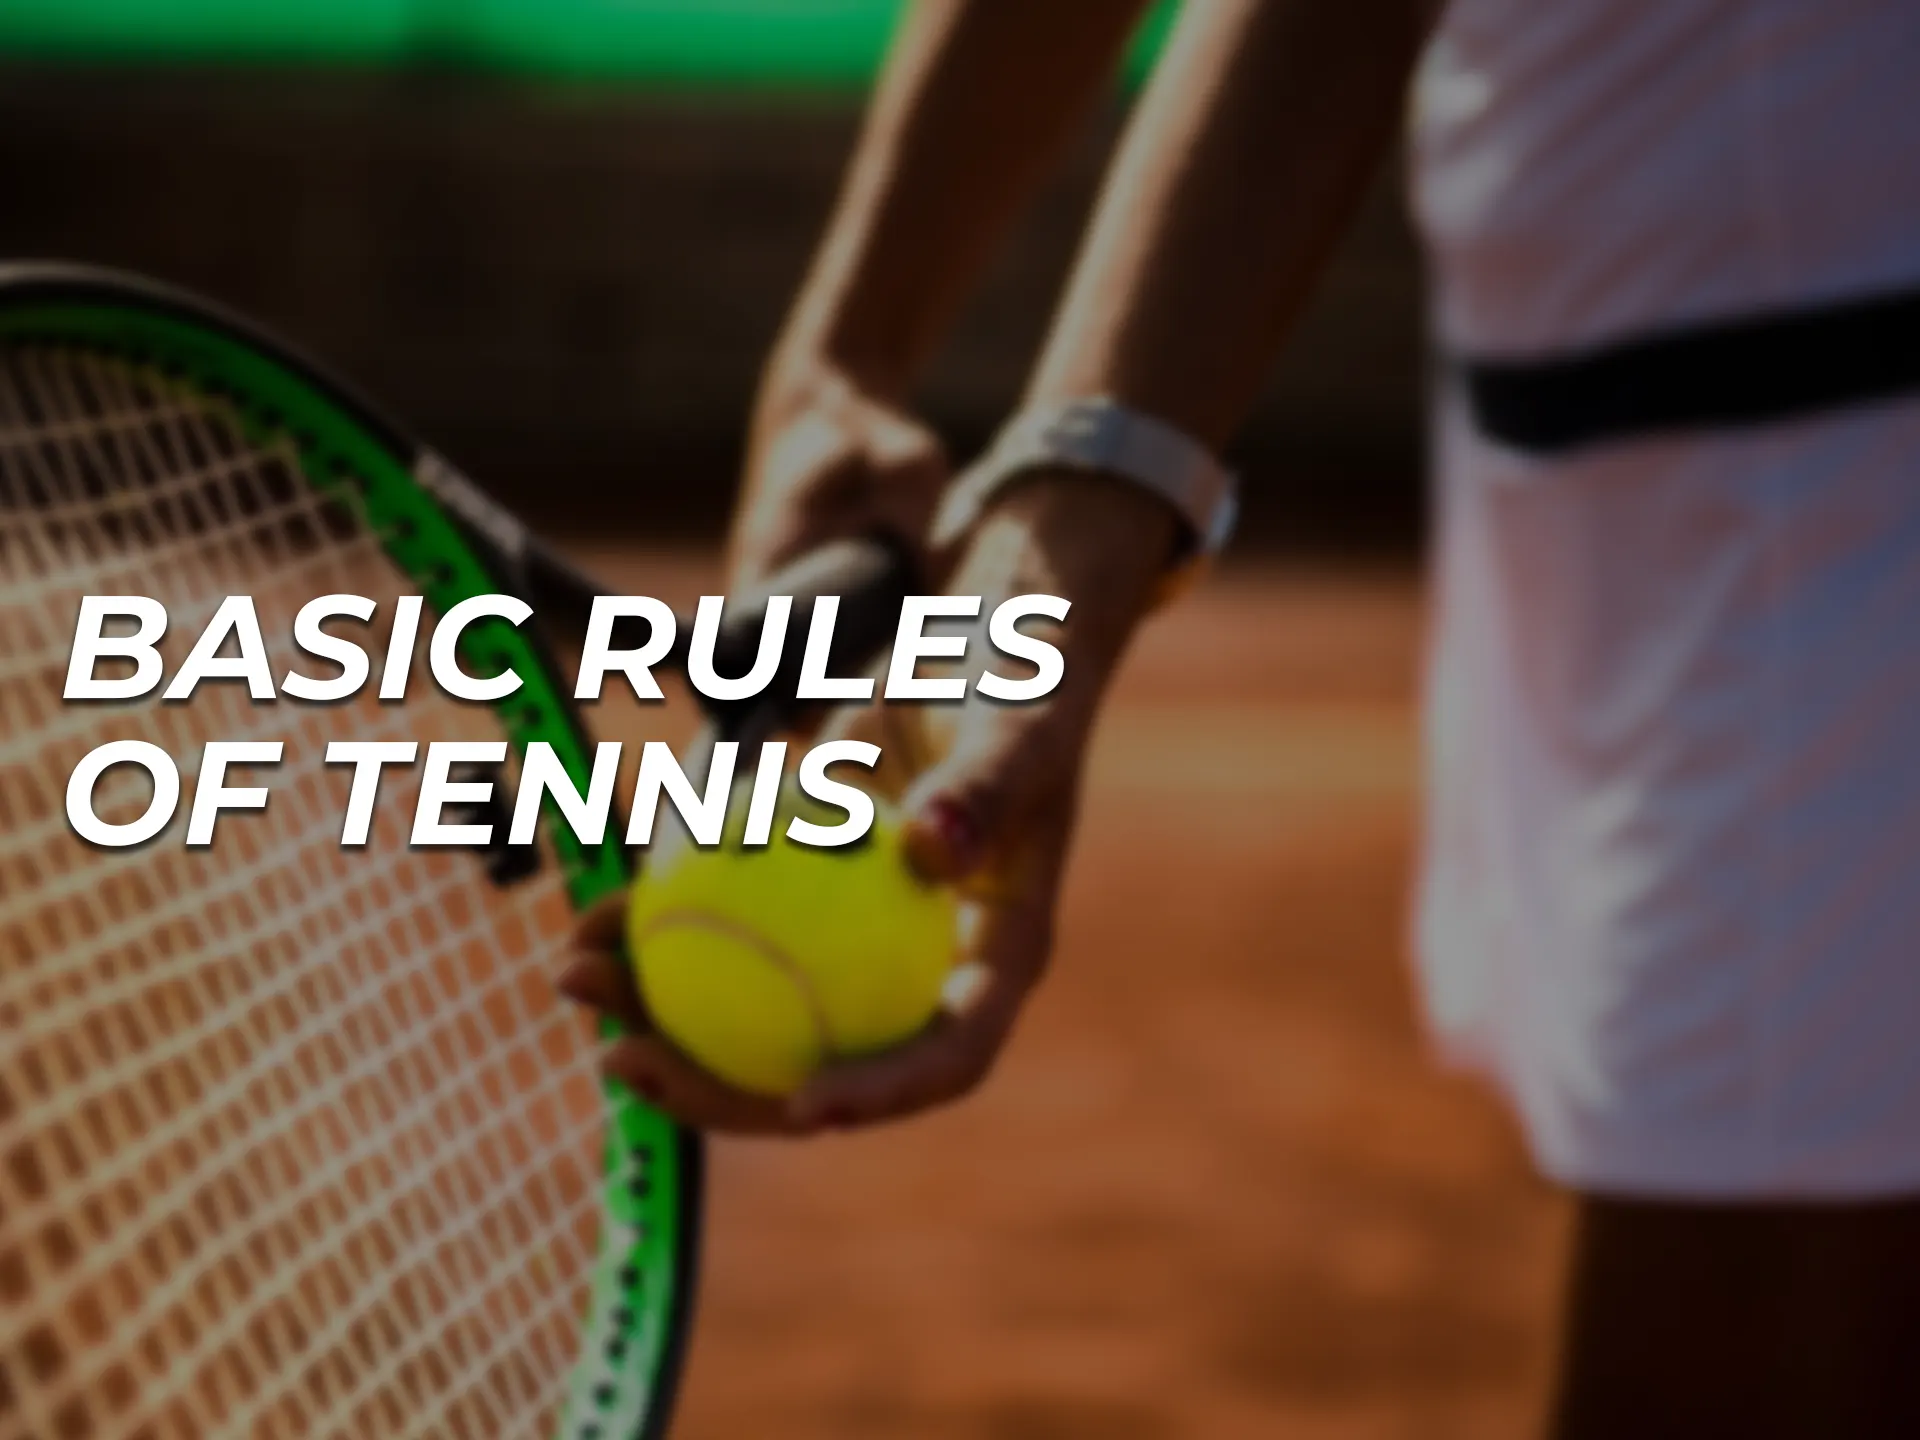 Update your tennis knowledge by learning the rules and basic concepts.